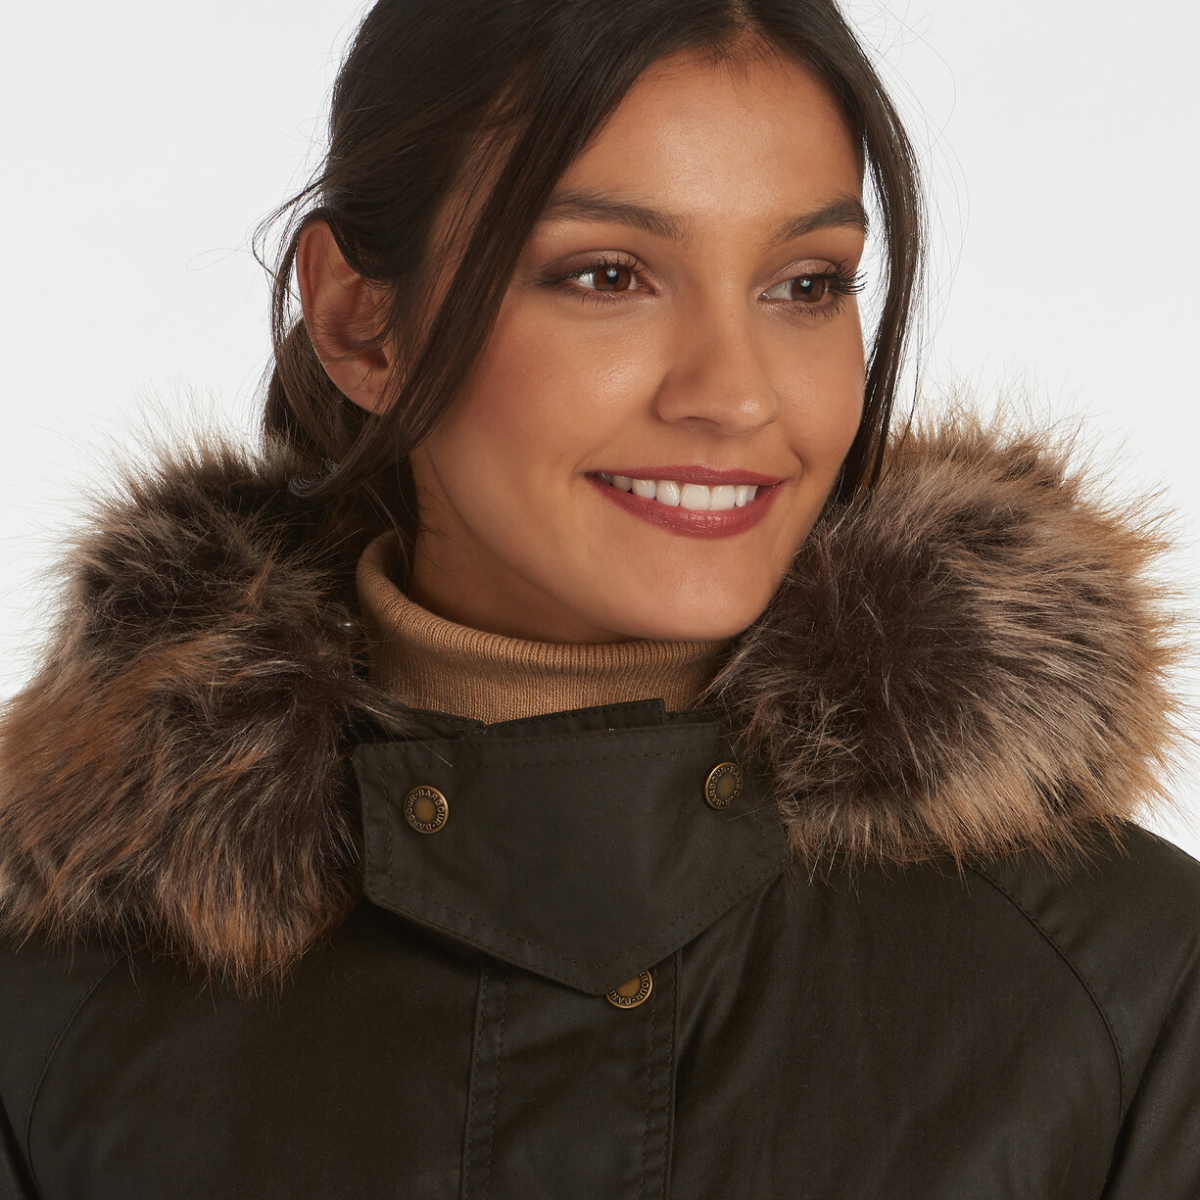 Barbour Mull Women's Waxed Jacket | Olive